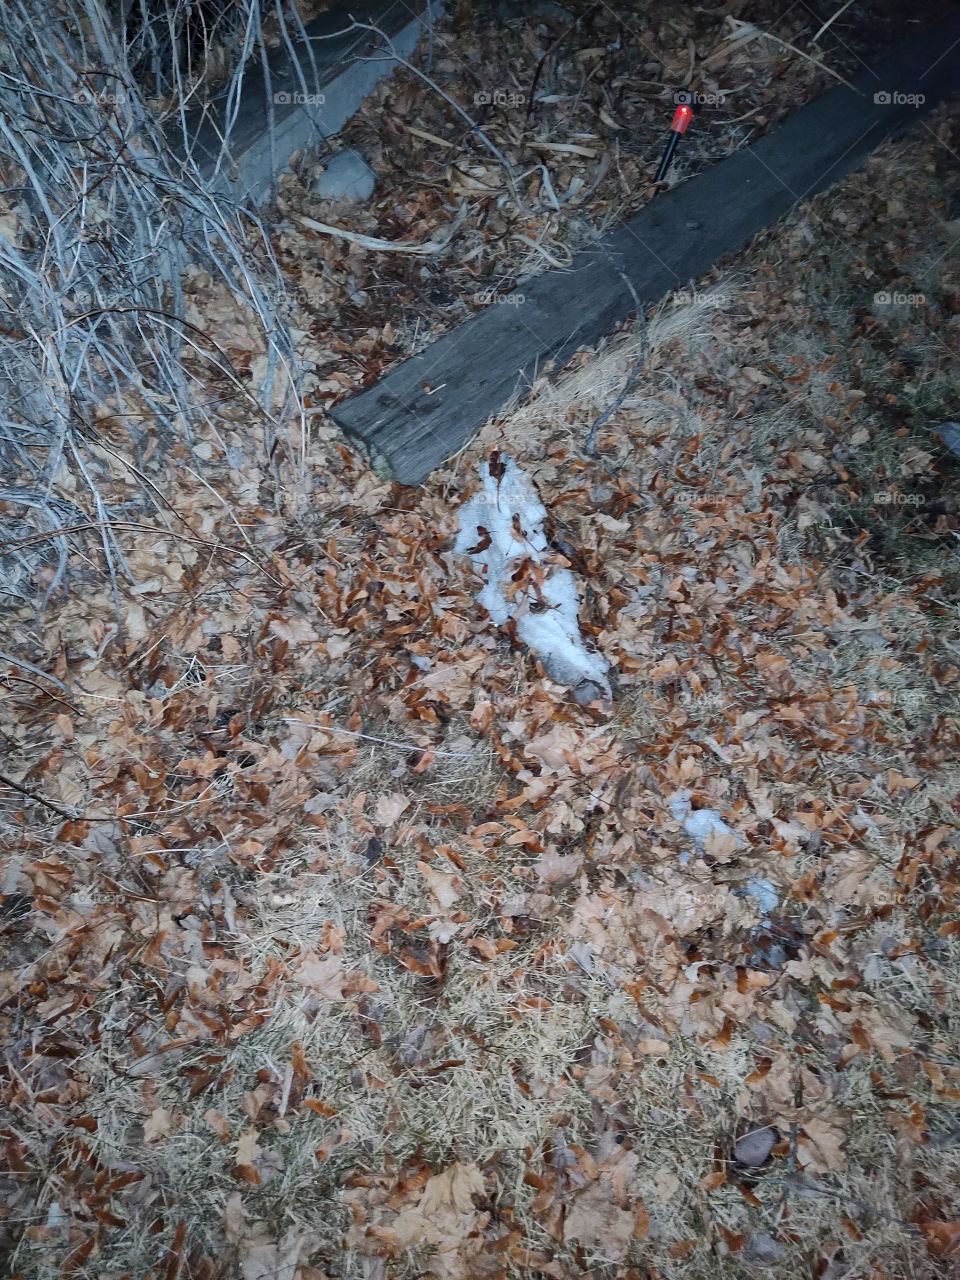 Melted snow. With a face in it.